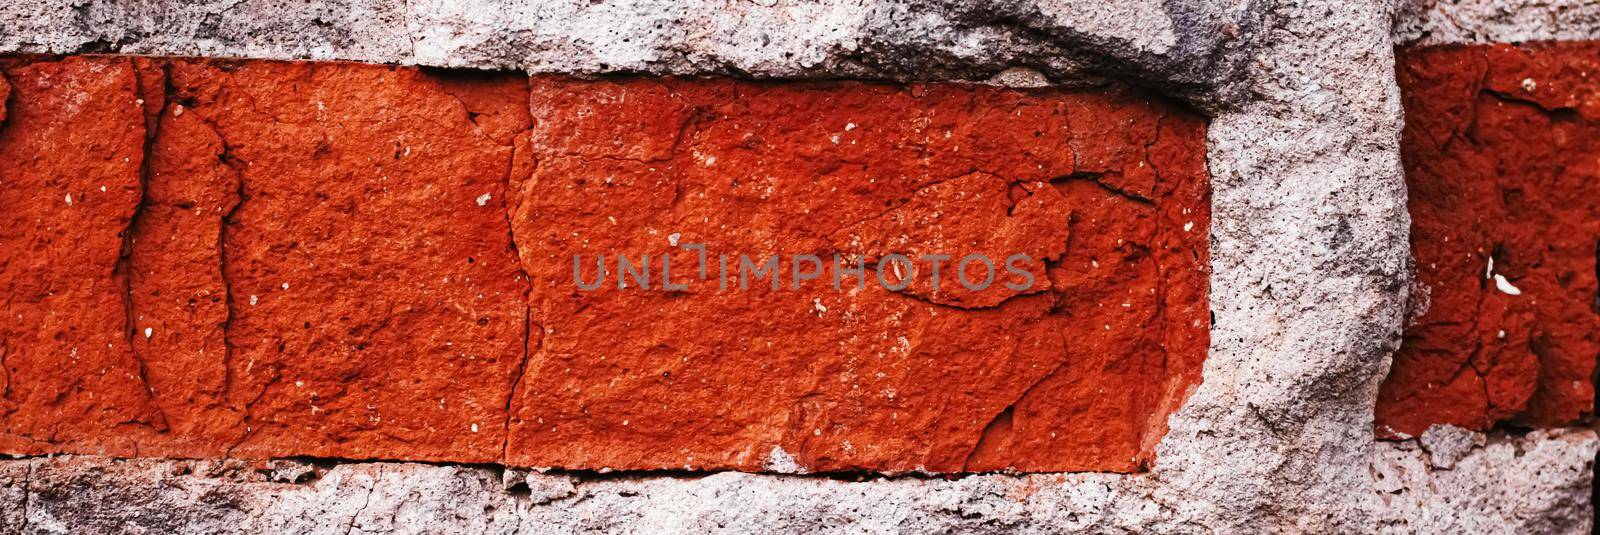 Old brick wall texture as grunge background and urban detail closeup